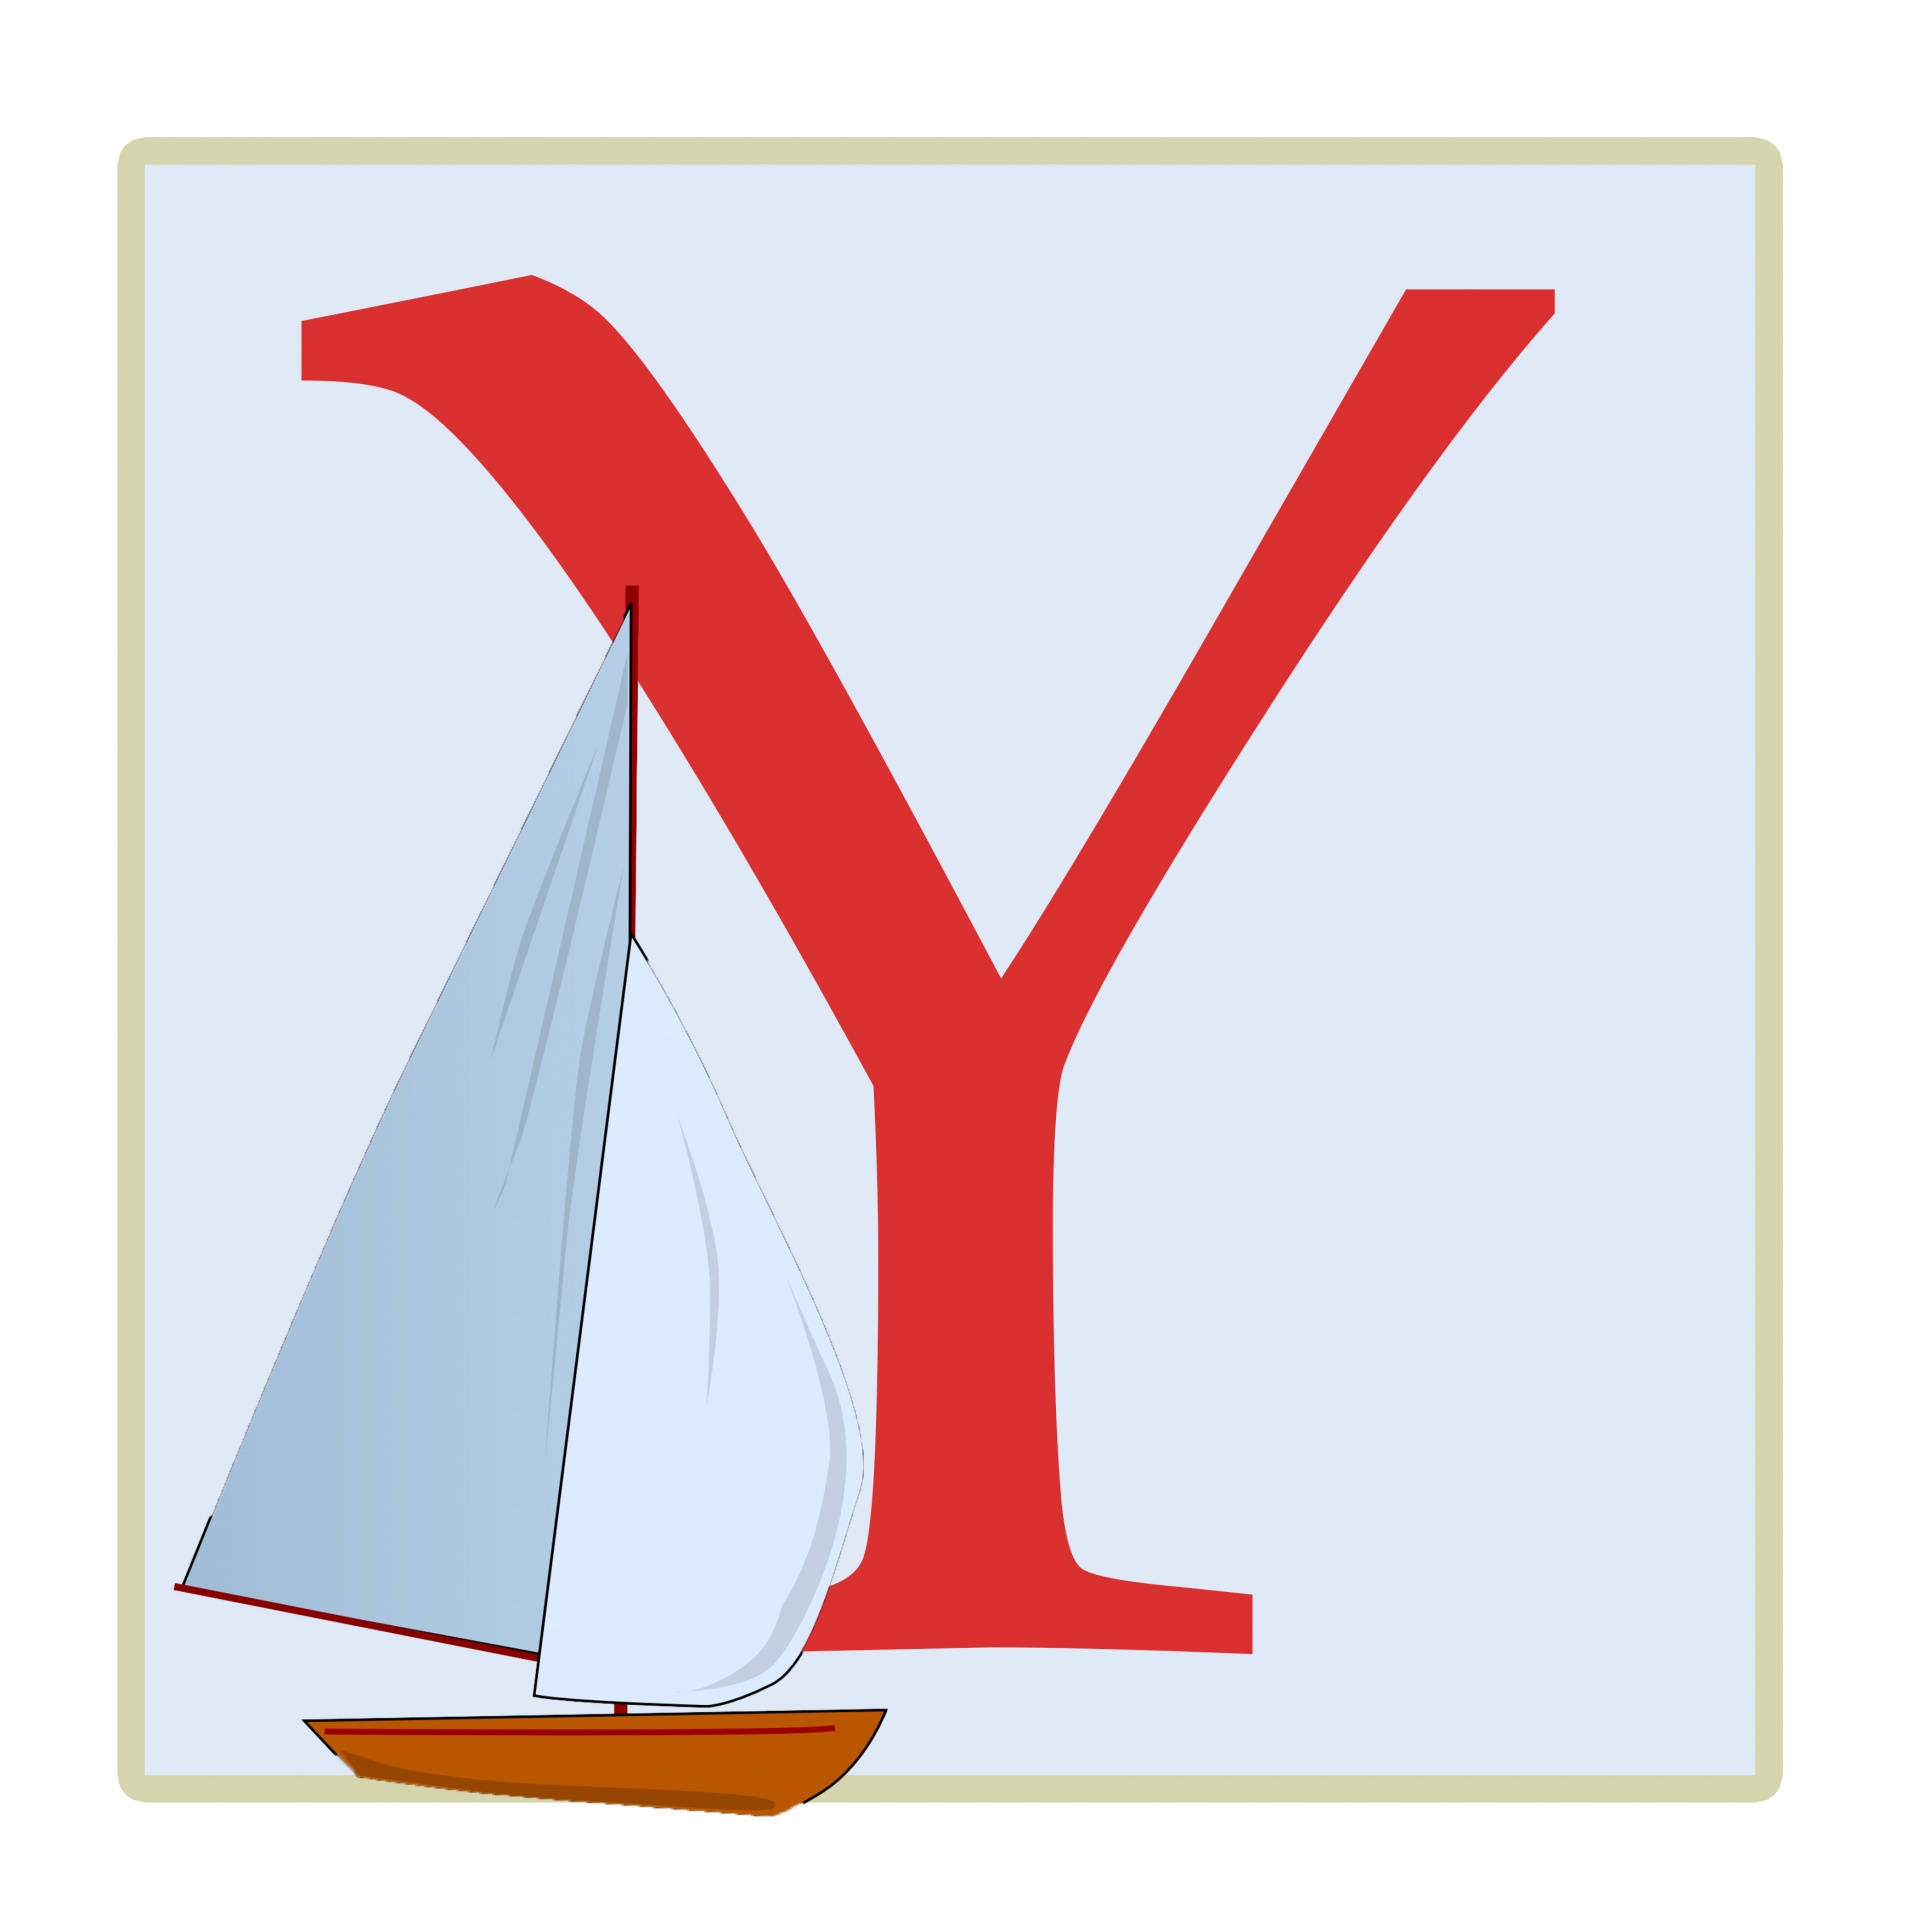 y for yacht meaning